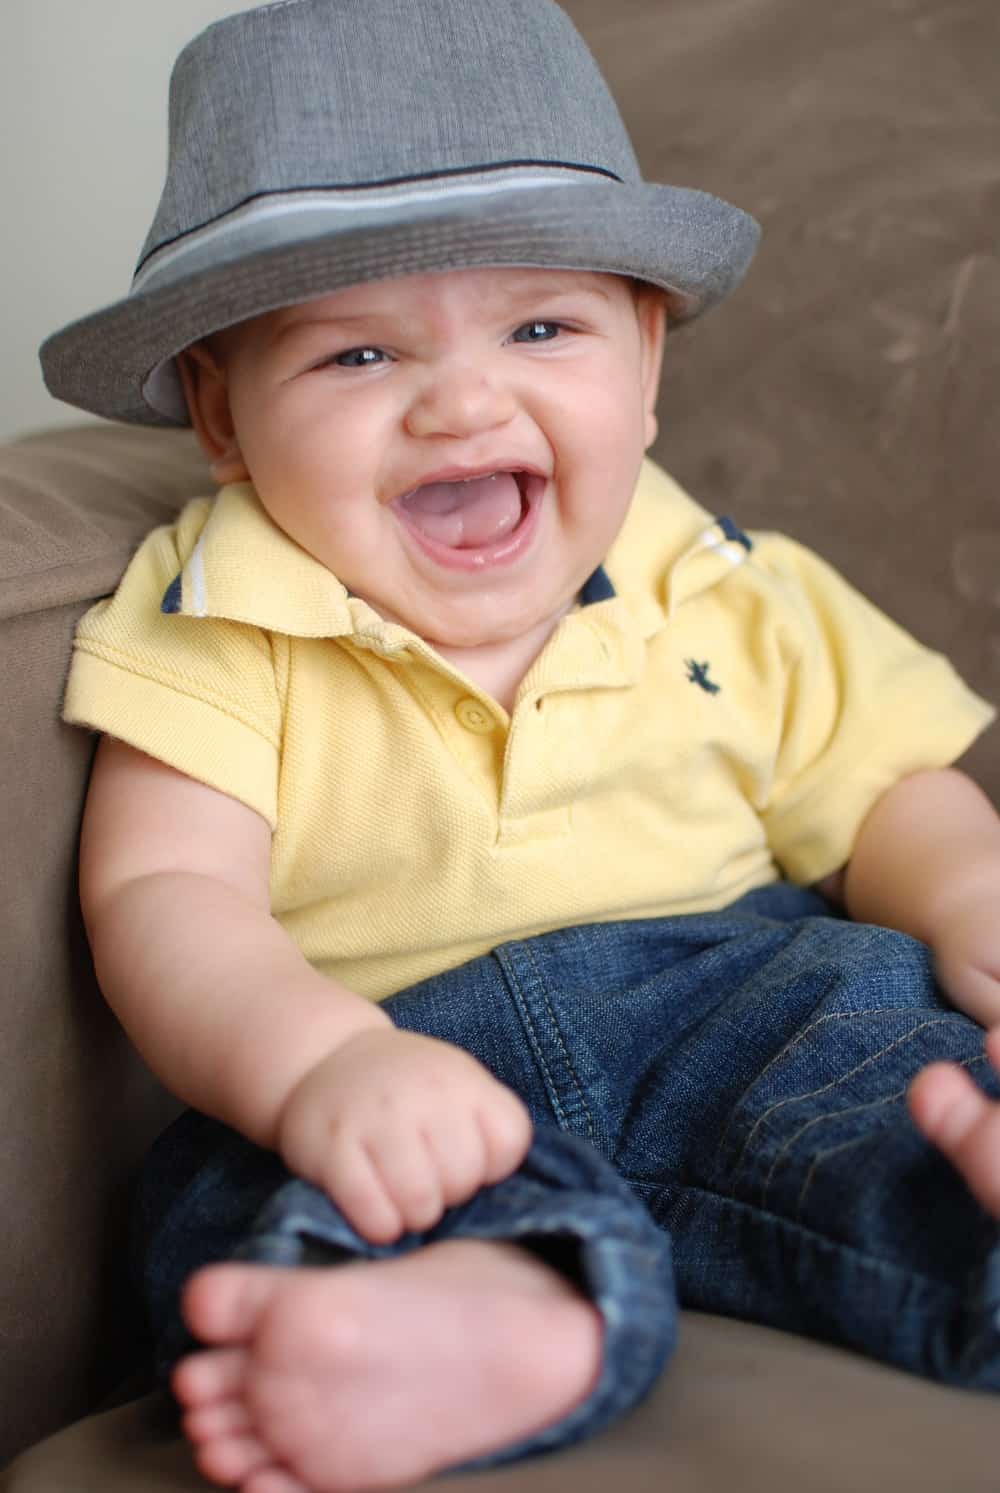 Baby with a fedora